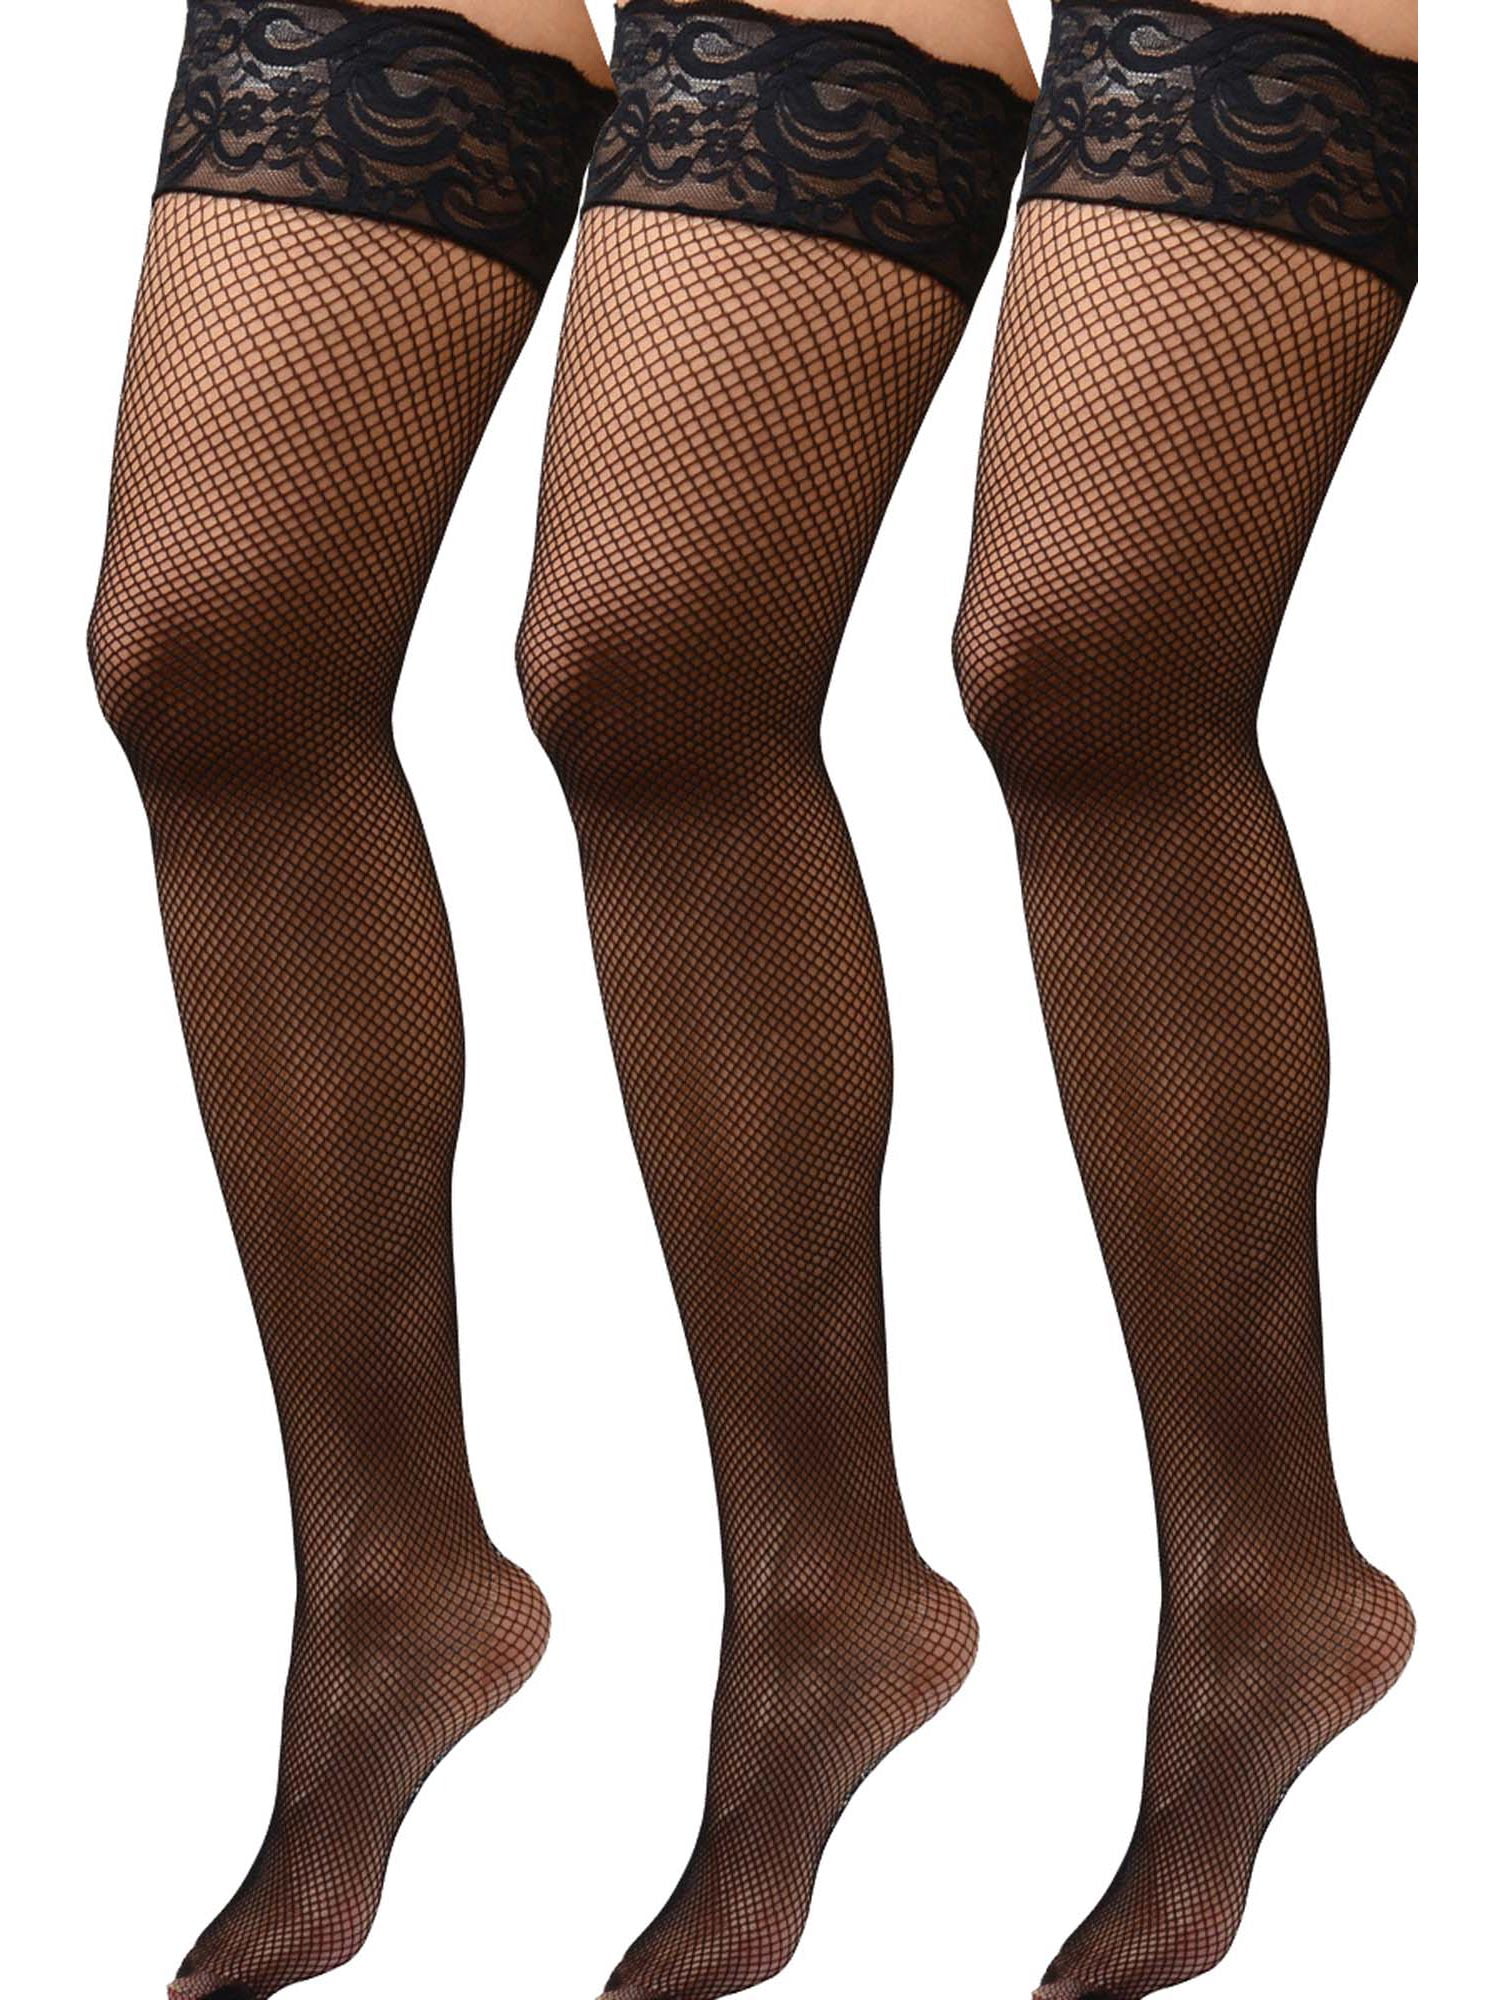 Womens Plus Size Hosiery Black Sheer Lace Top Stay Up Silicone Thigh High 3x/4x 